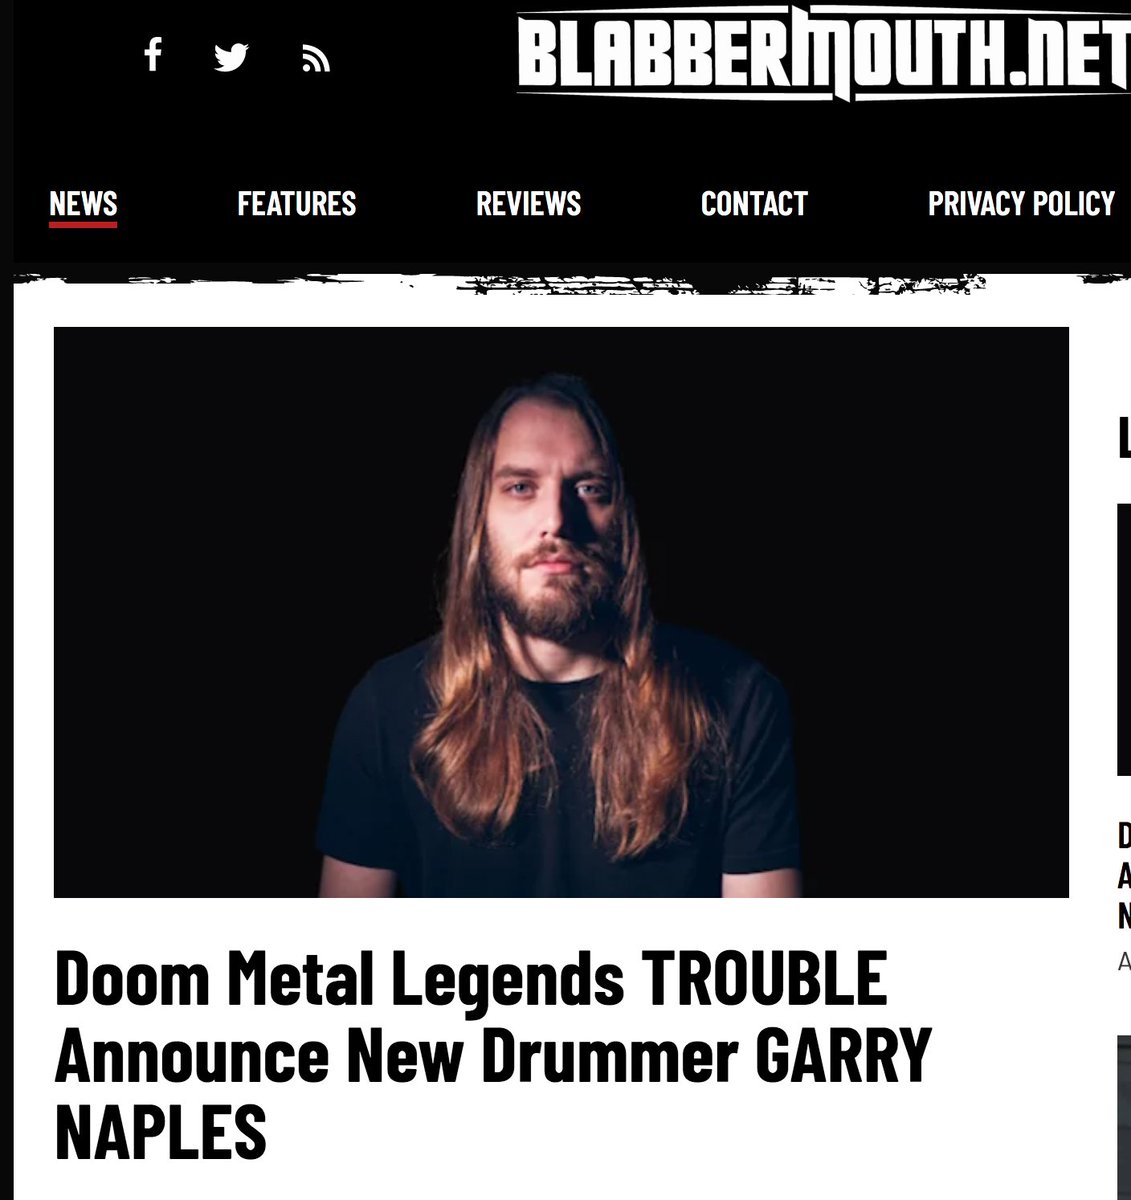 Thanks to @BLABBERMOUTHNET for sharing our news ¥